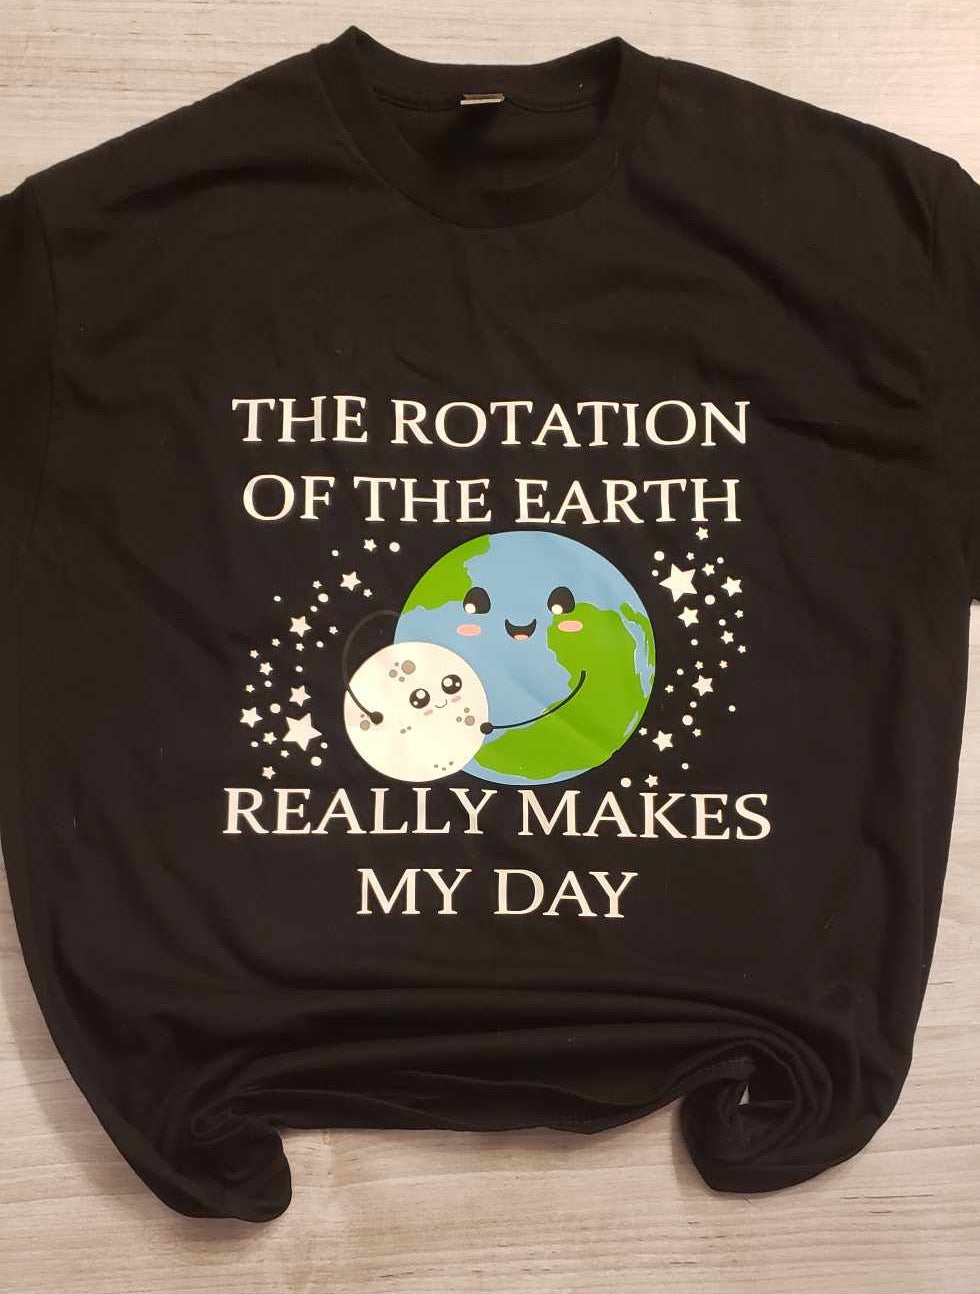 The Rotation of the Earth